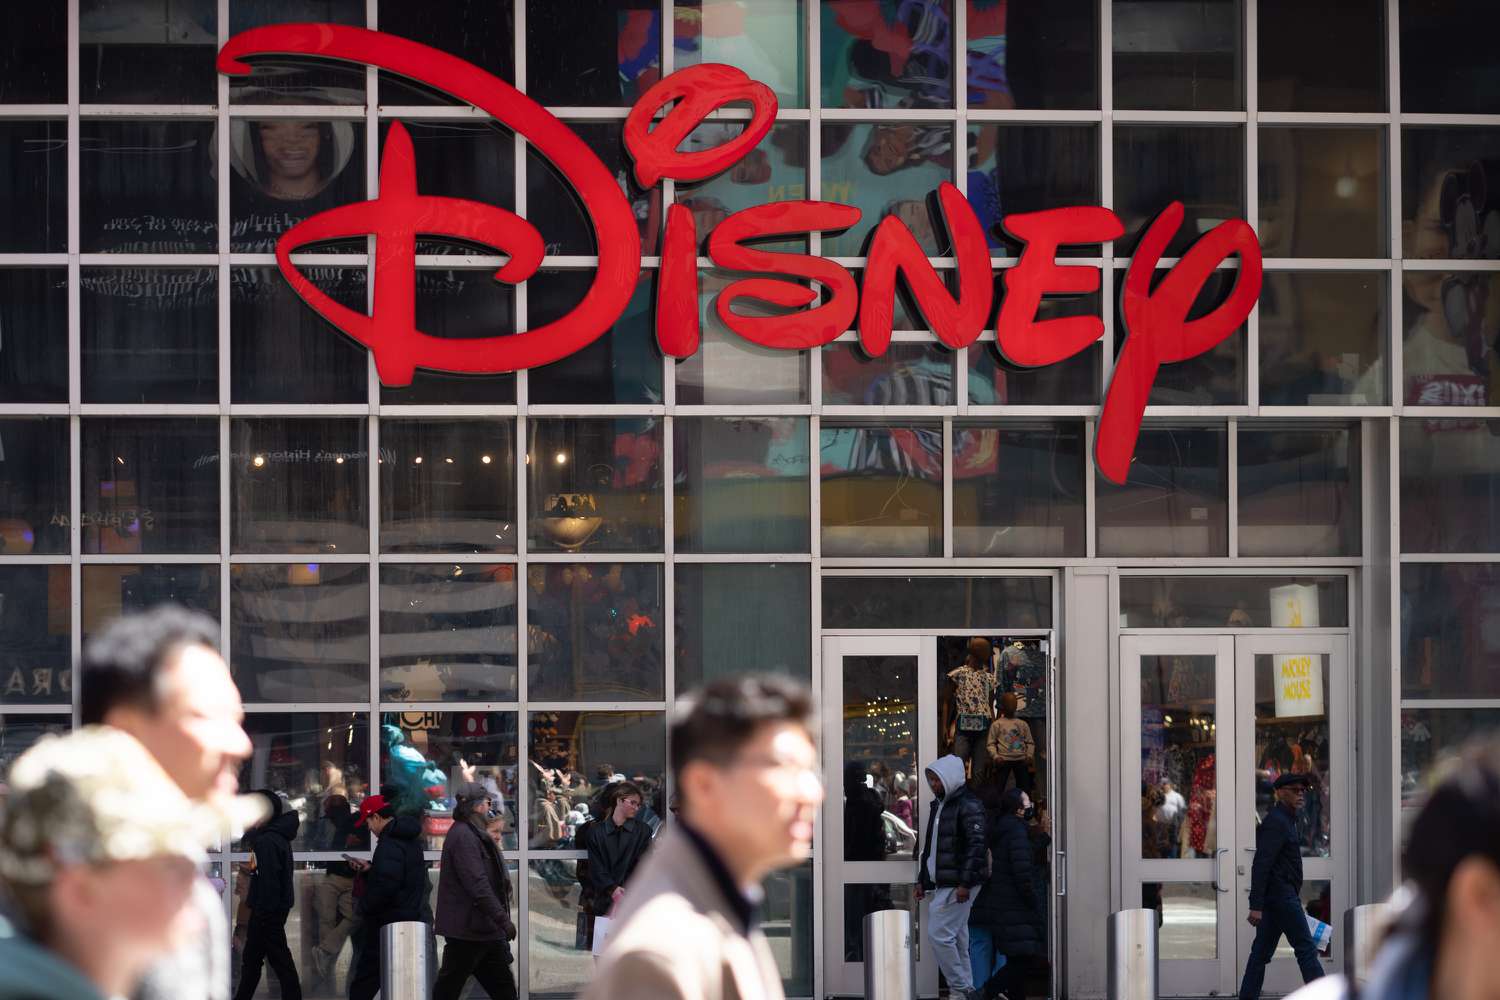 What You Need To Know Ahead of Disney’s Earnings Report Tuesday [Video]